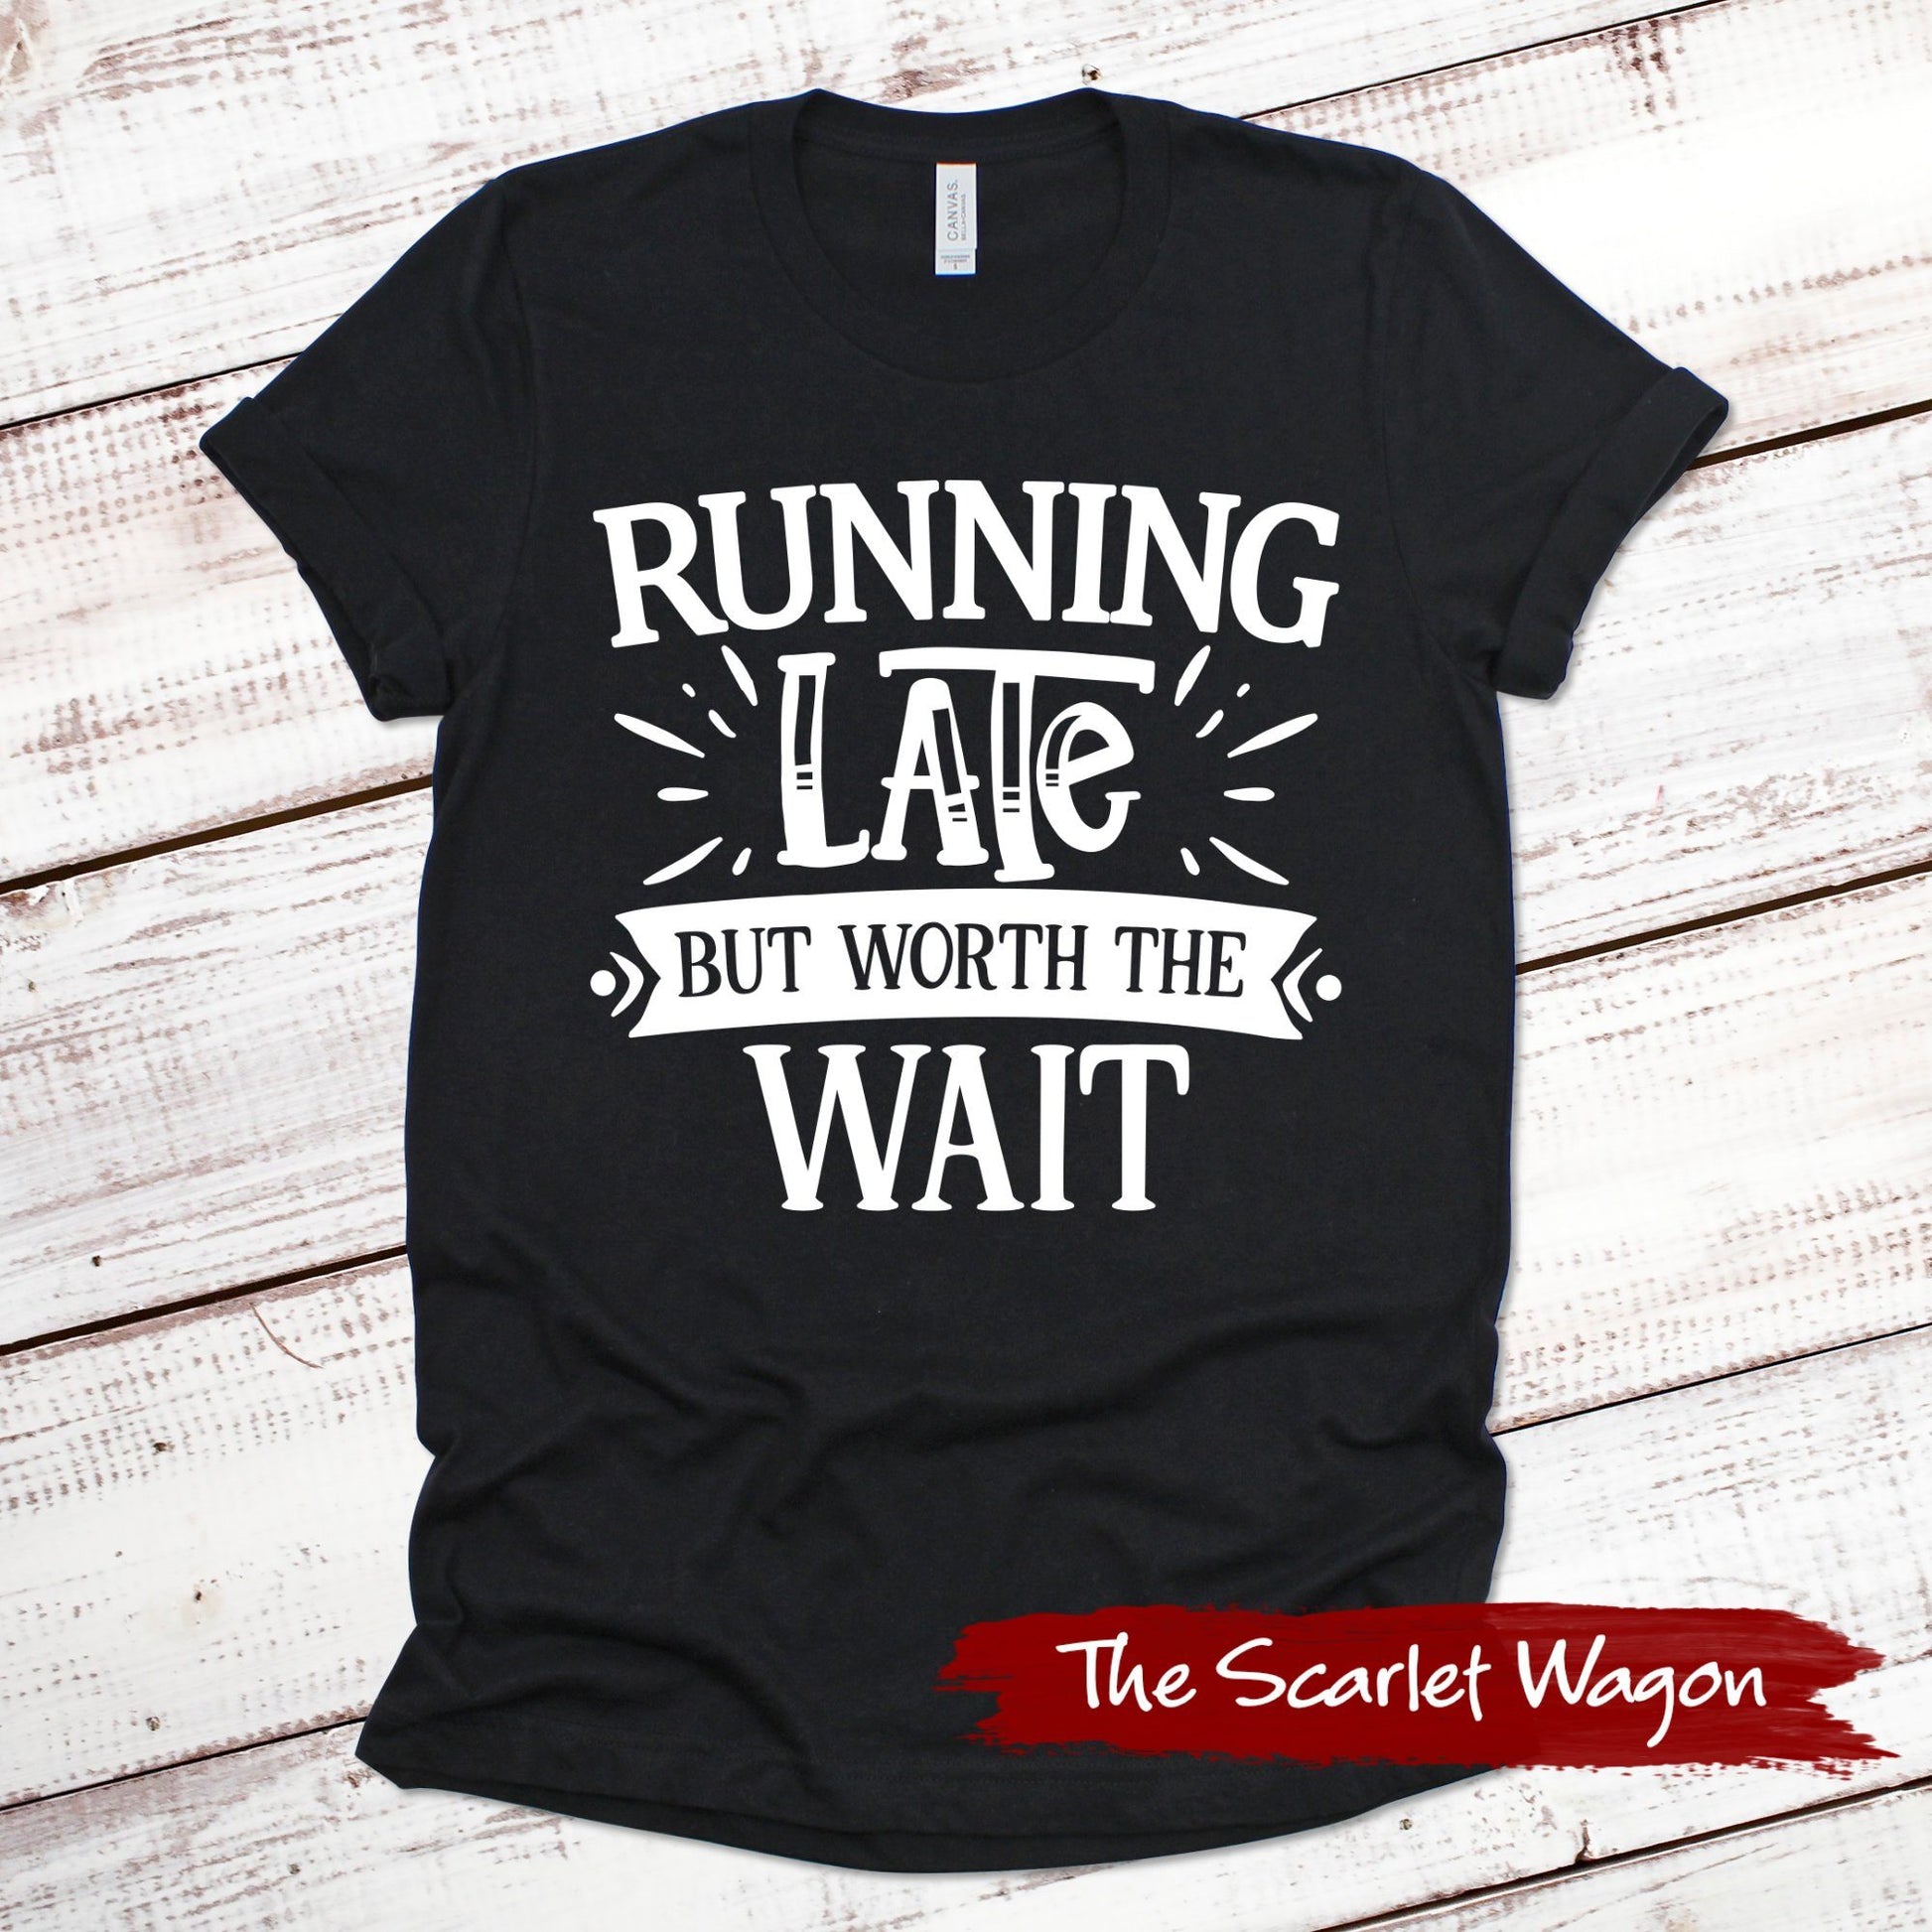 Running Late But Worth the Wait Funny Shirt Scarlet Wagon Black XS 